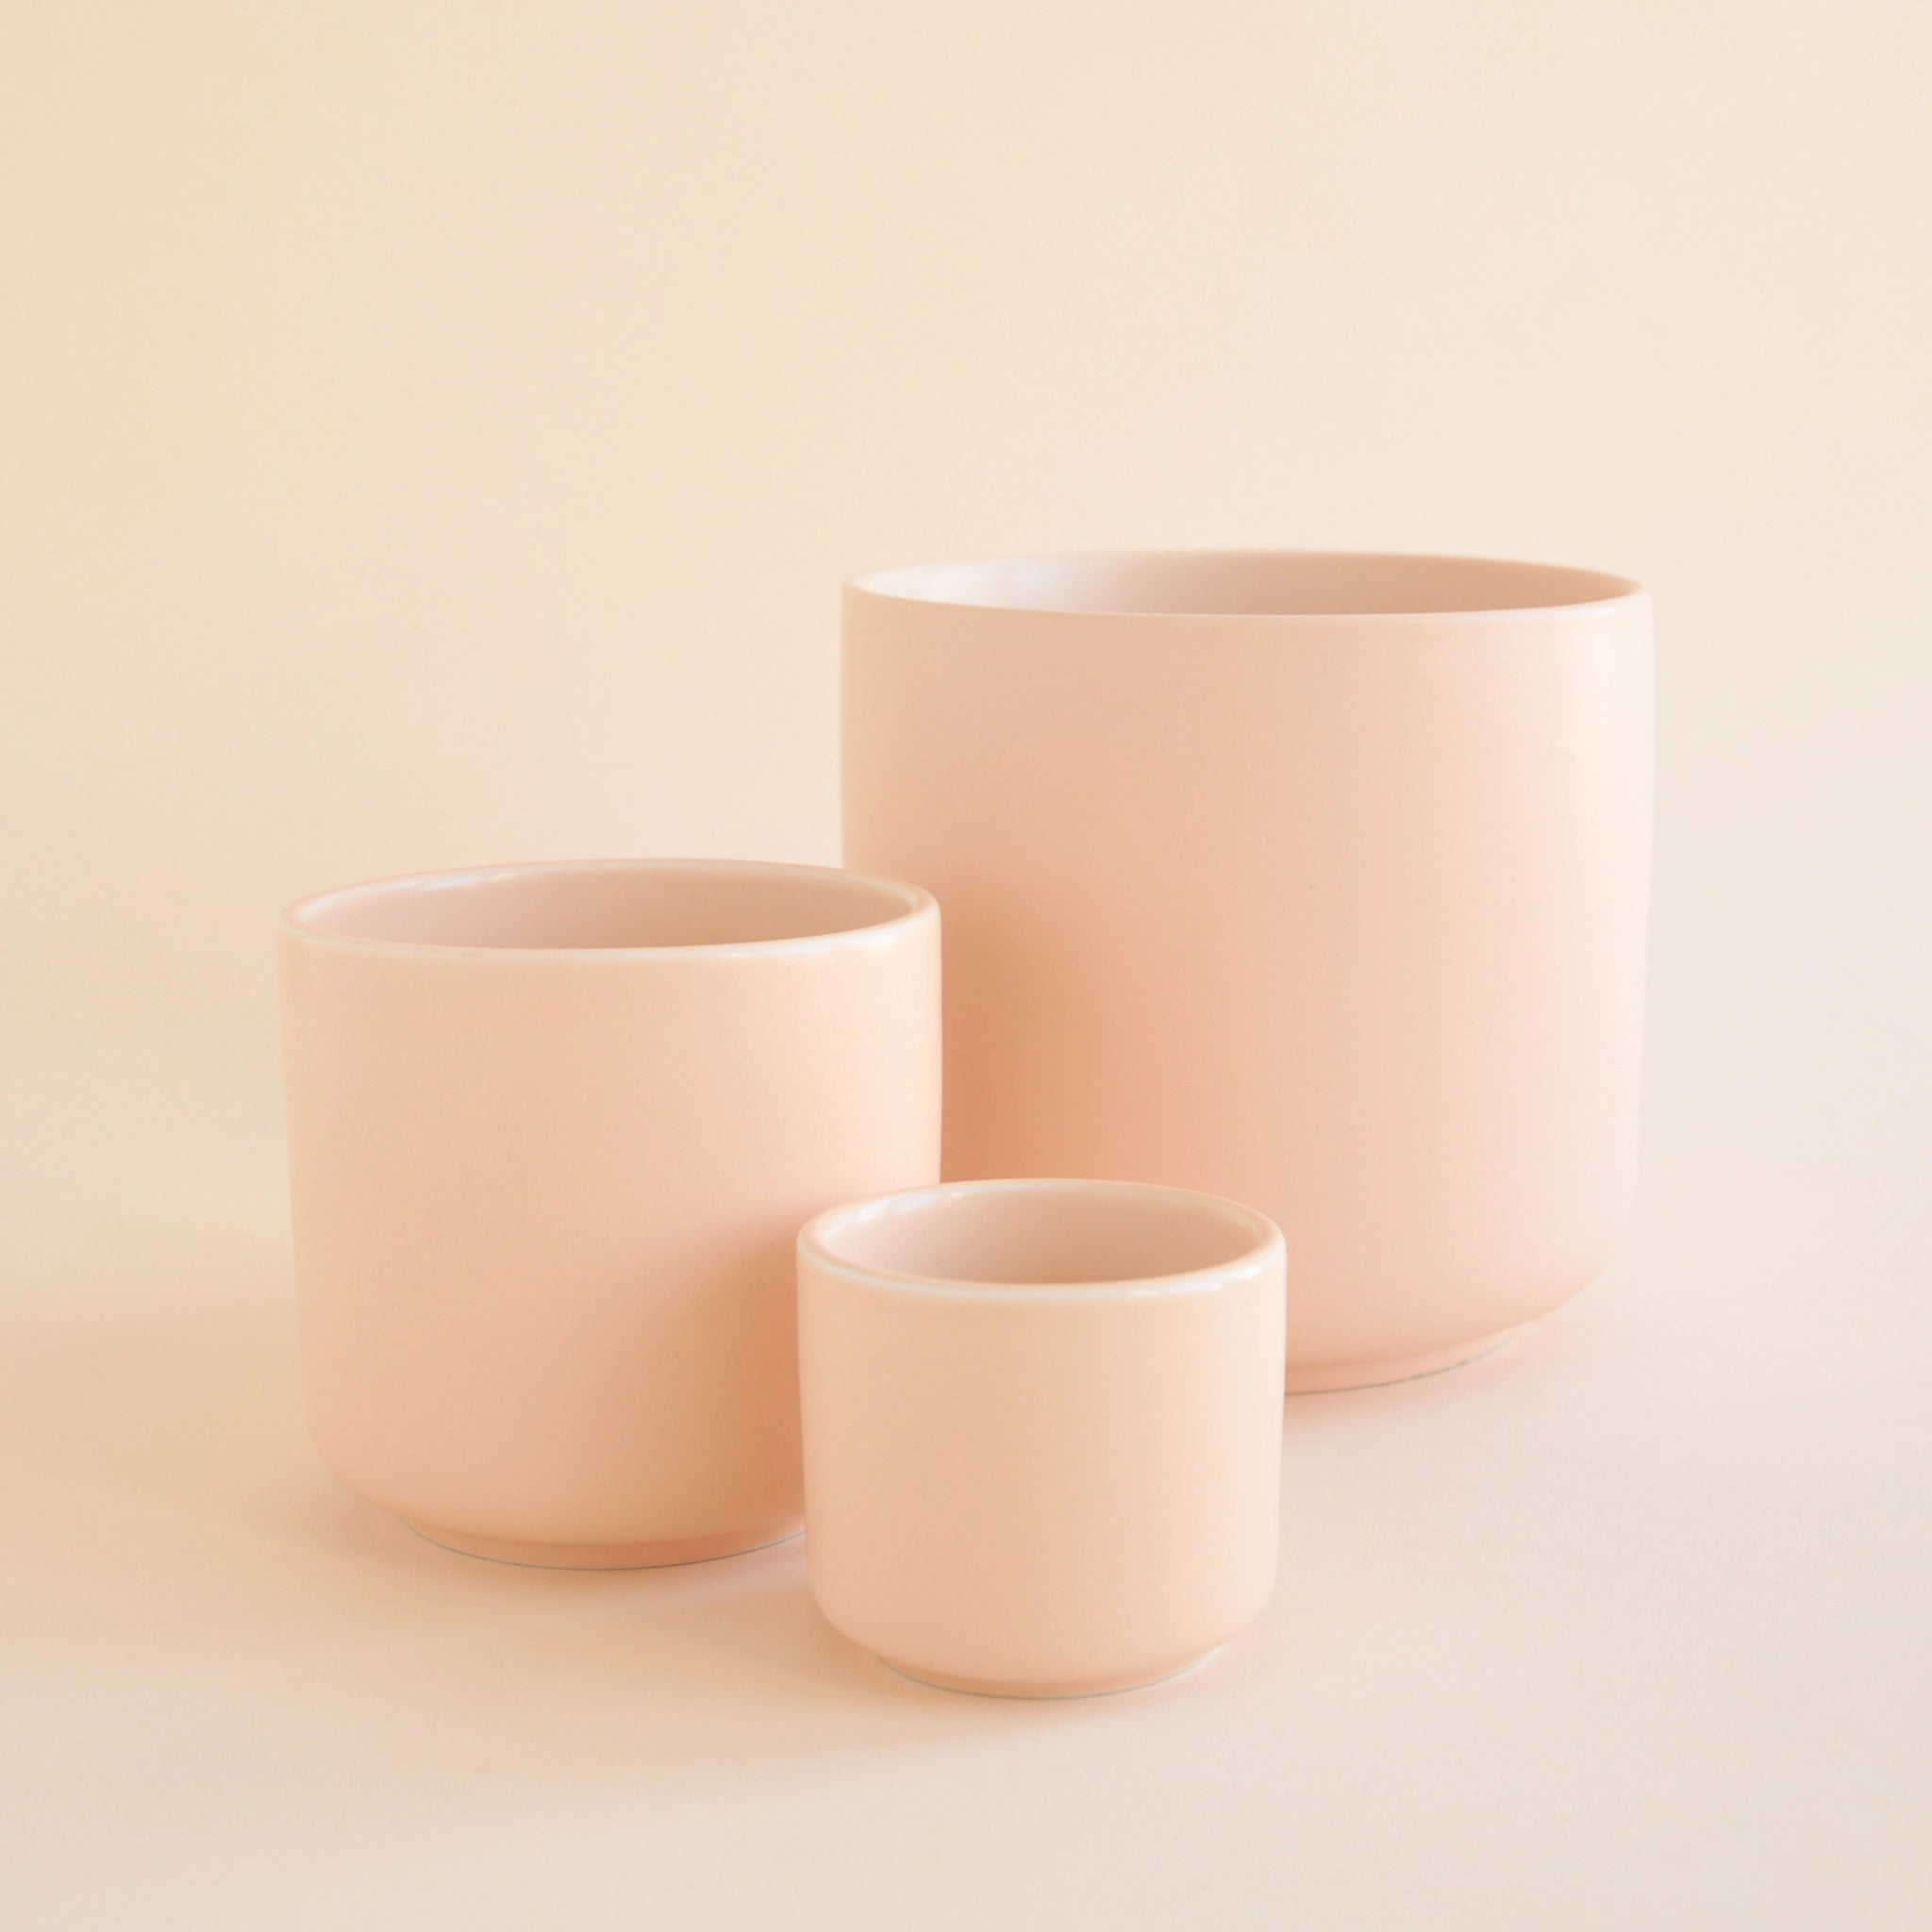 On a cream background is three different sized pink ceramic pots.